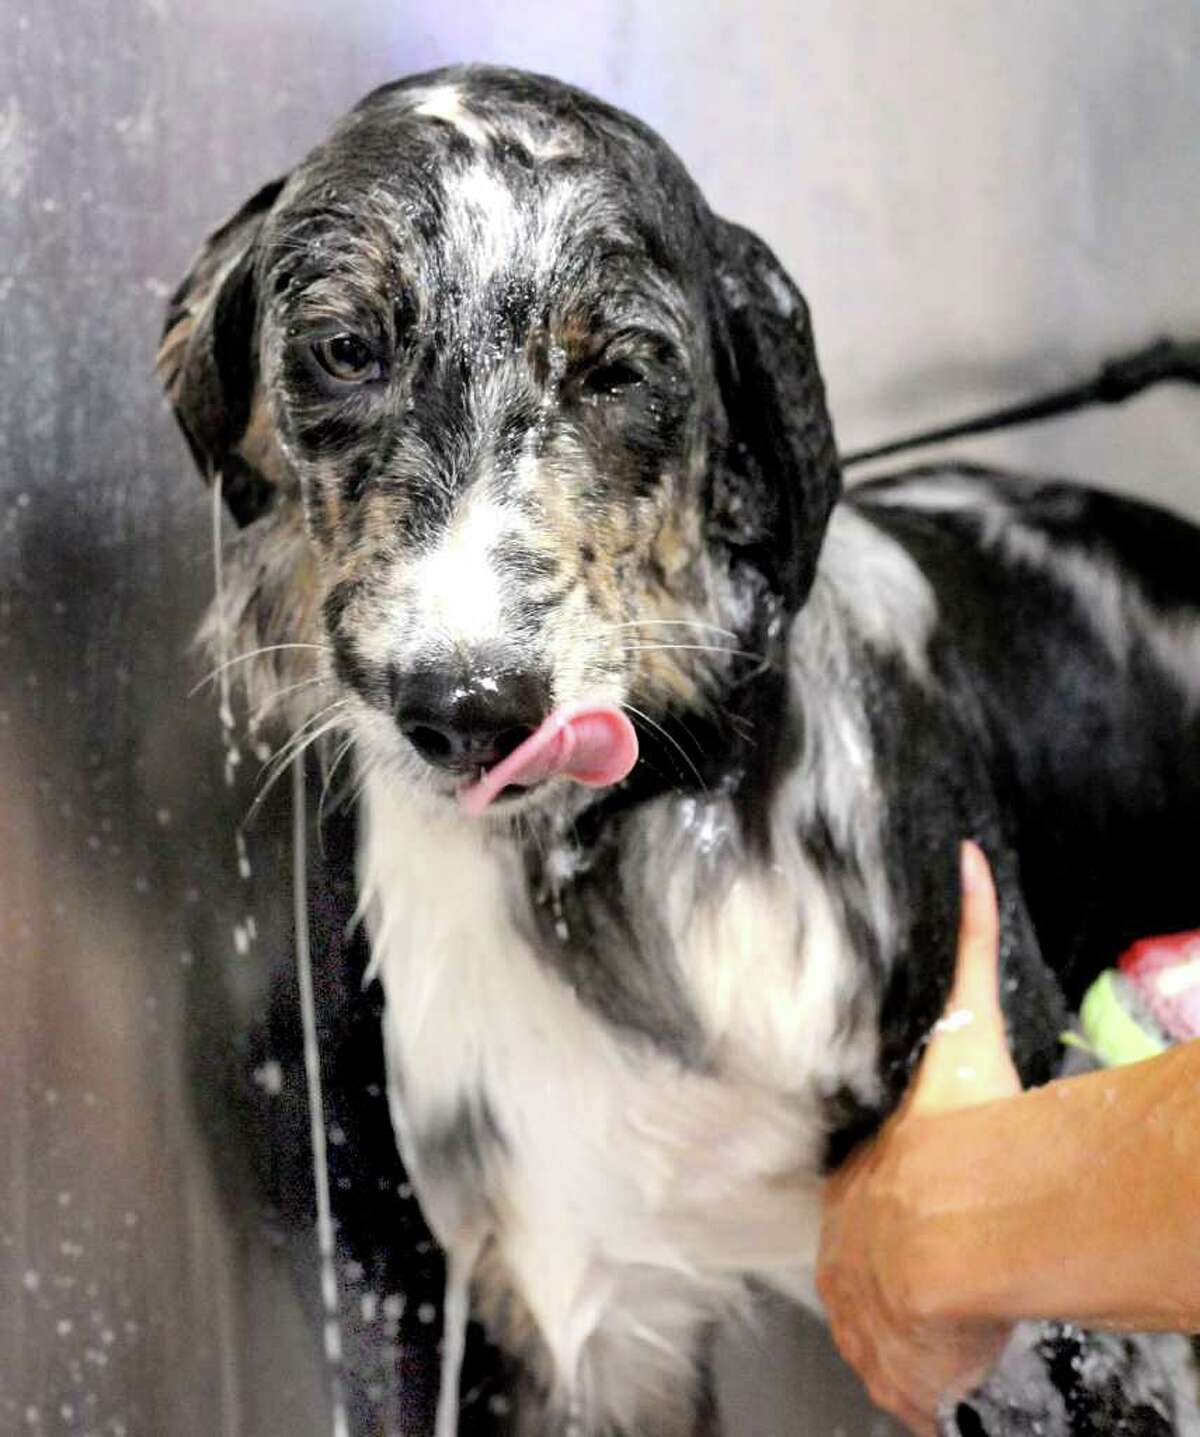 Darby, an Australian sepherd rescue dog, gets a shampoo at A Paw Print, in Brookfield, during a Dog Wash Day to benefit Animal Welfare in New Milford Sunday, Aug. 14, 2011.